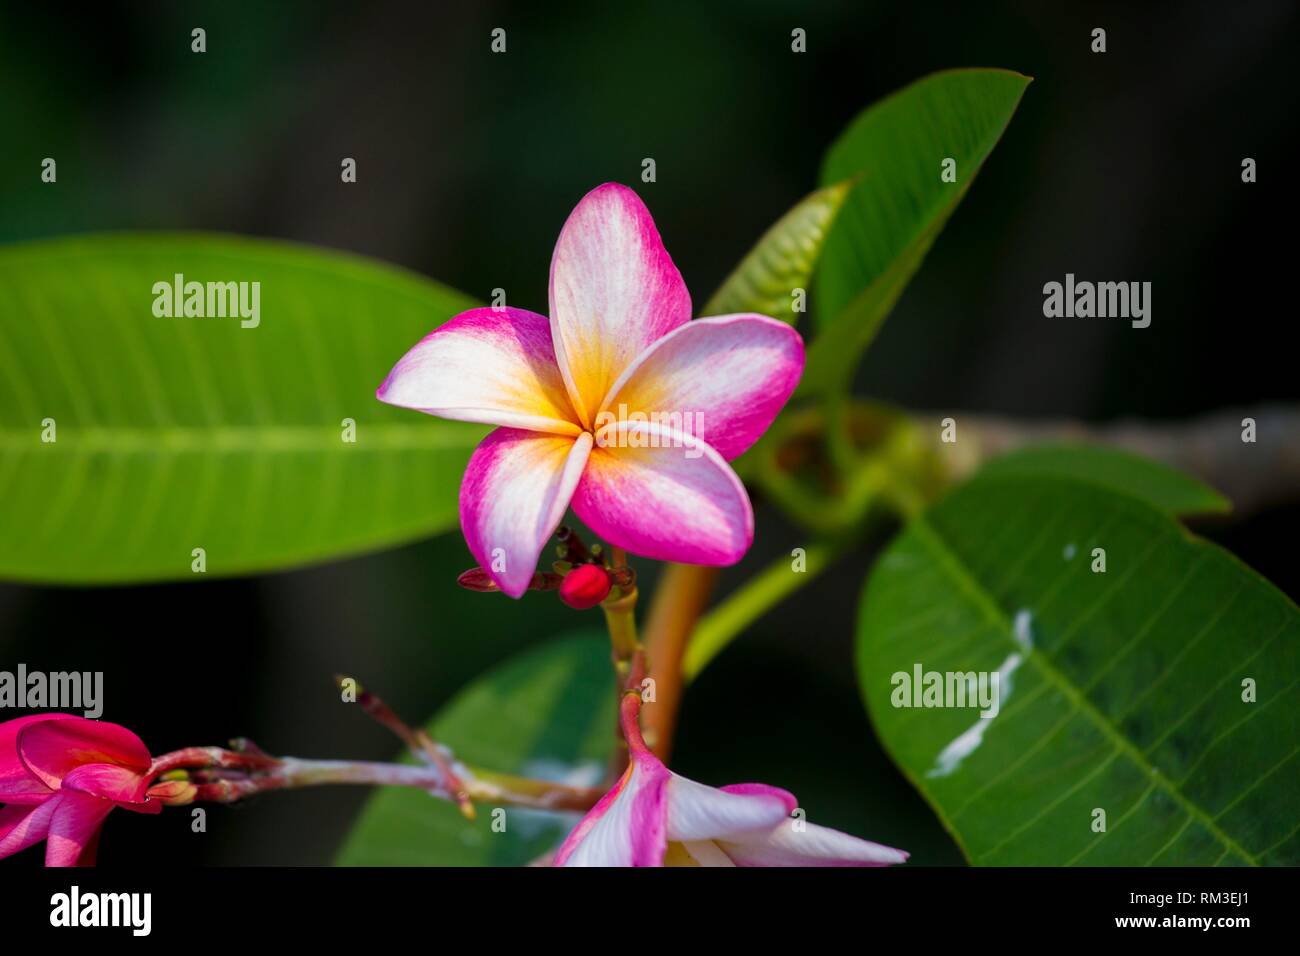 Plumeria common name plumeria is a genus of flowering plants in the dogbane family, Apocynaceae. It contains primarily deciduous shrubs and small Stock Photo